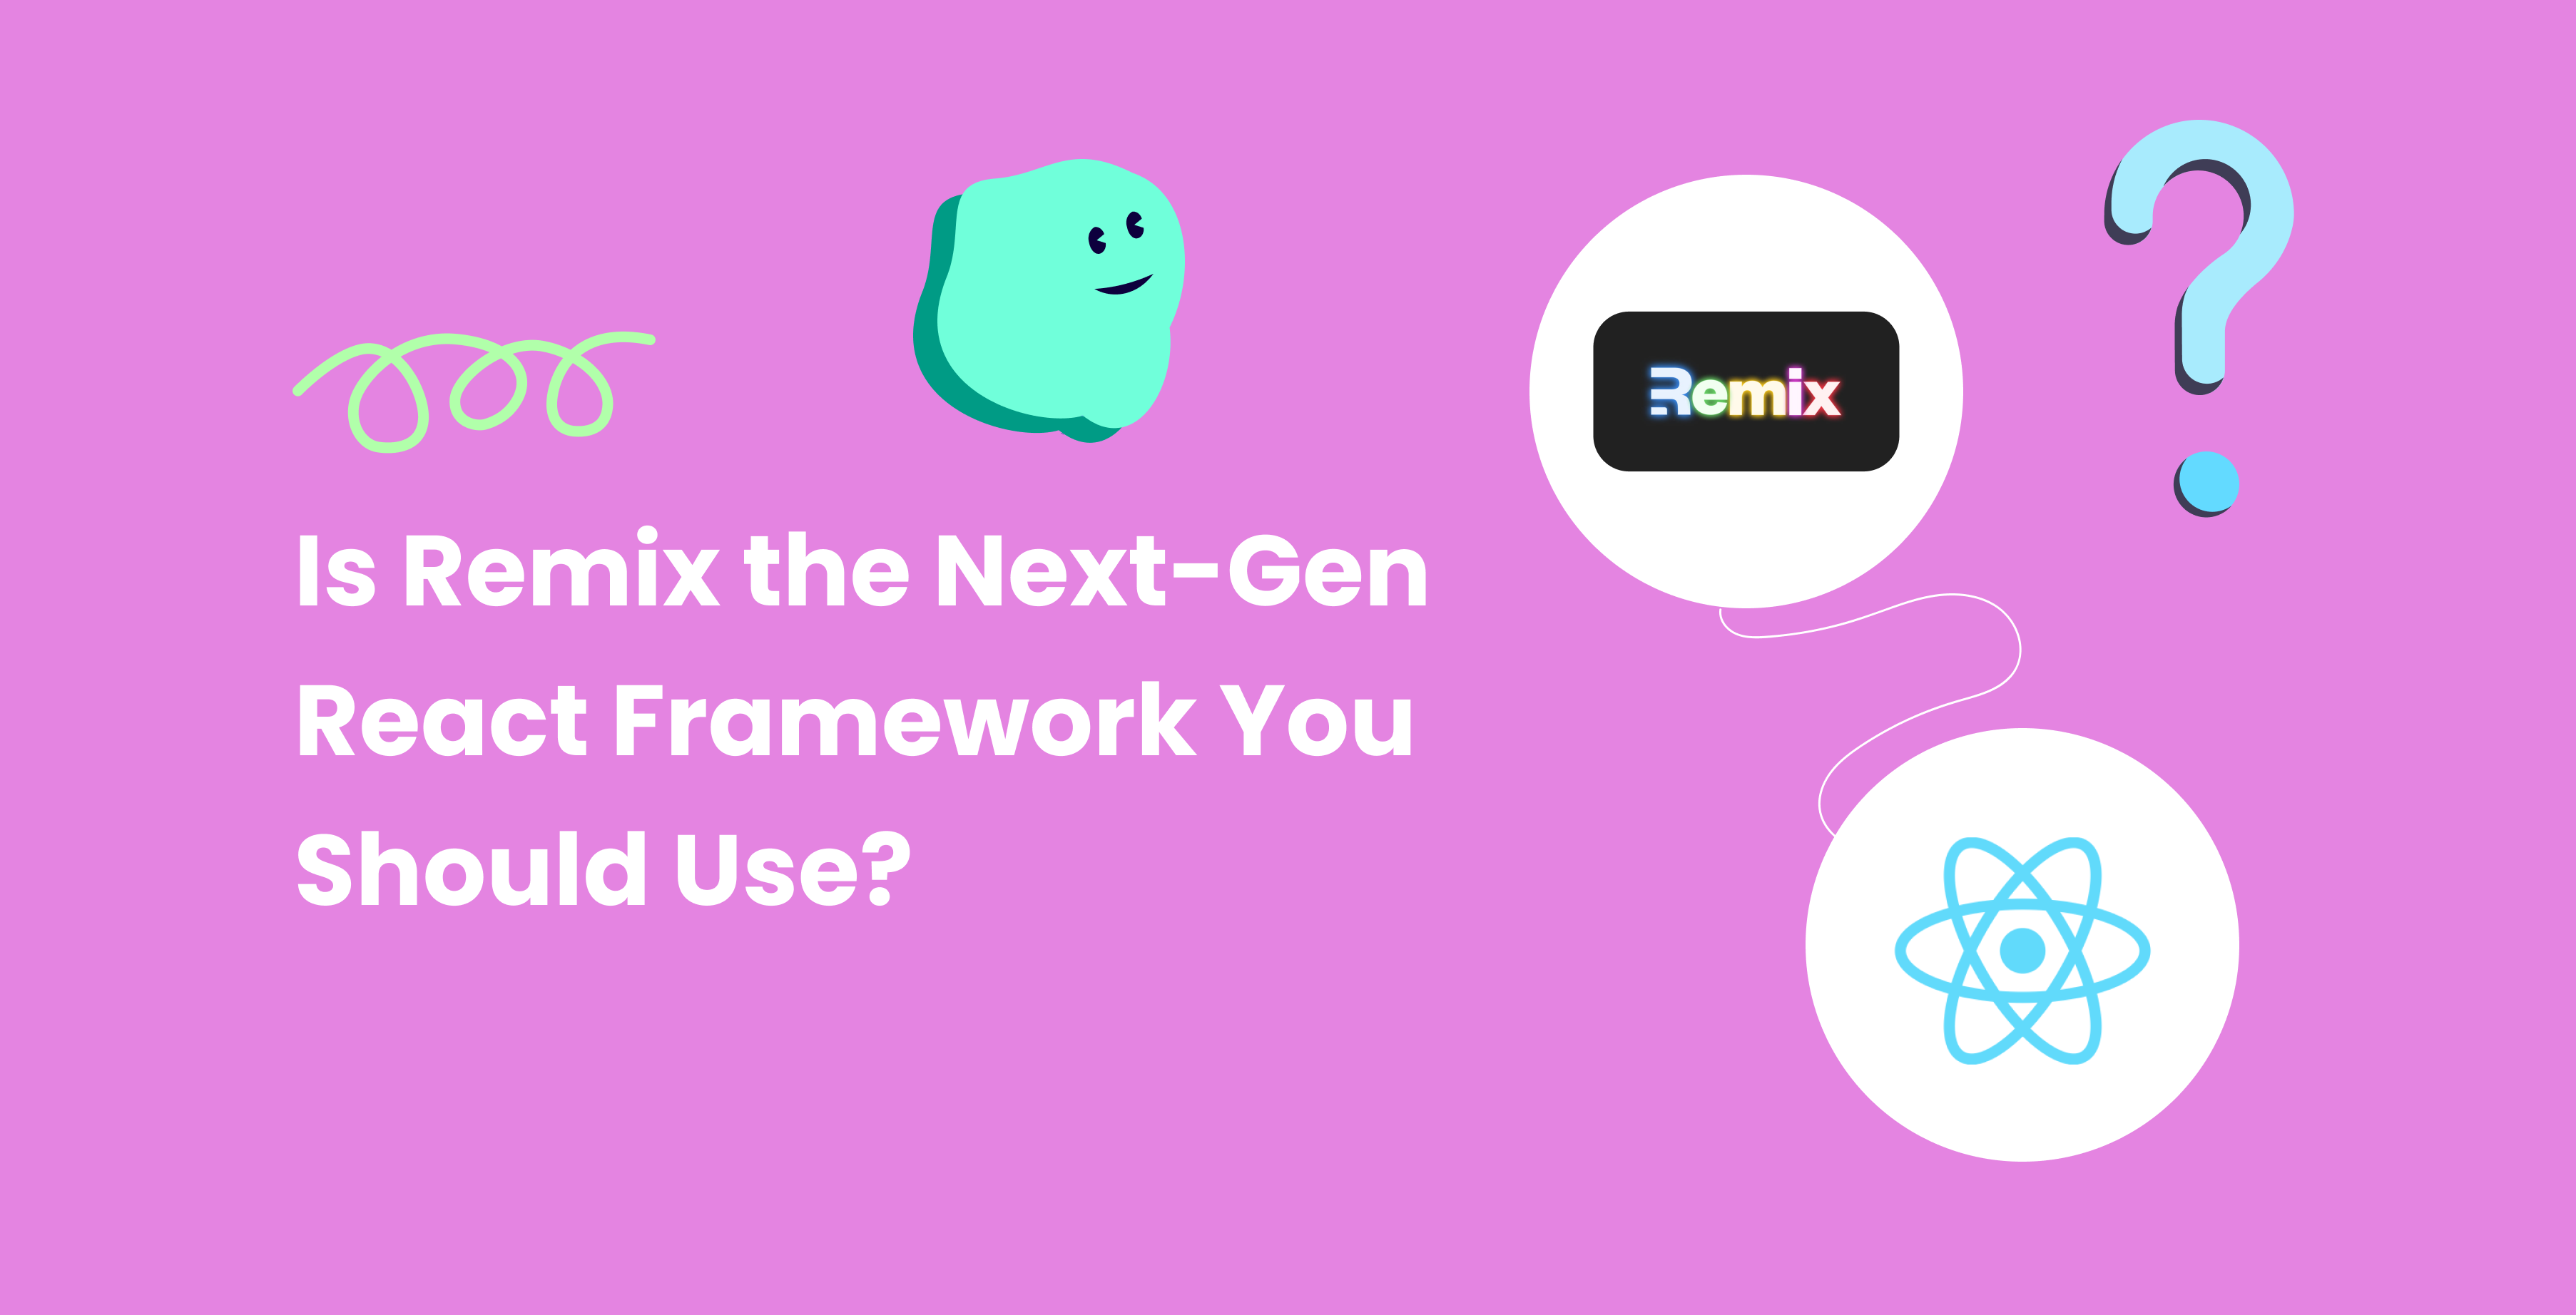 Is Remix the Next-Gen React Framework You Should Use?